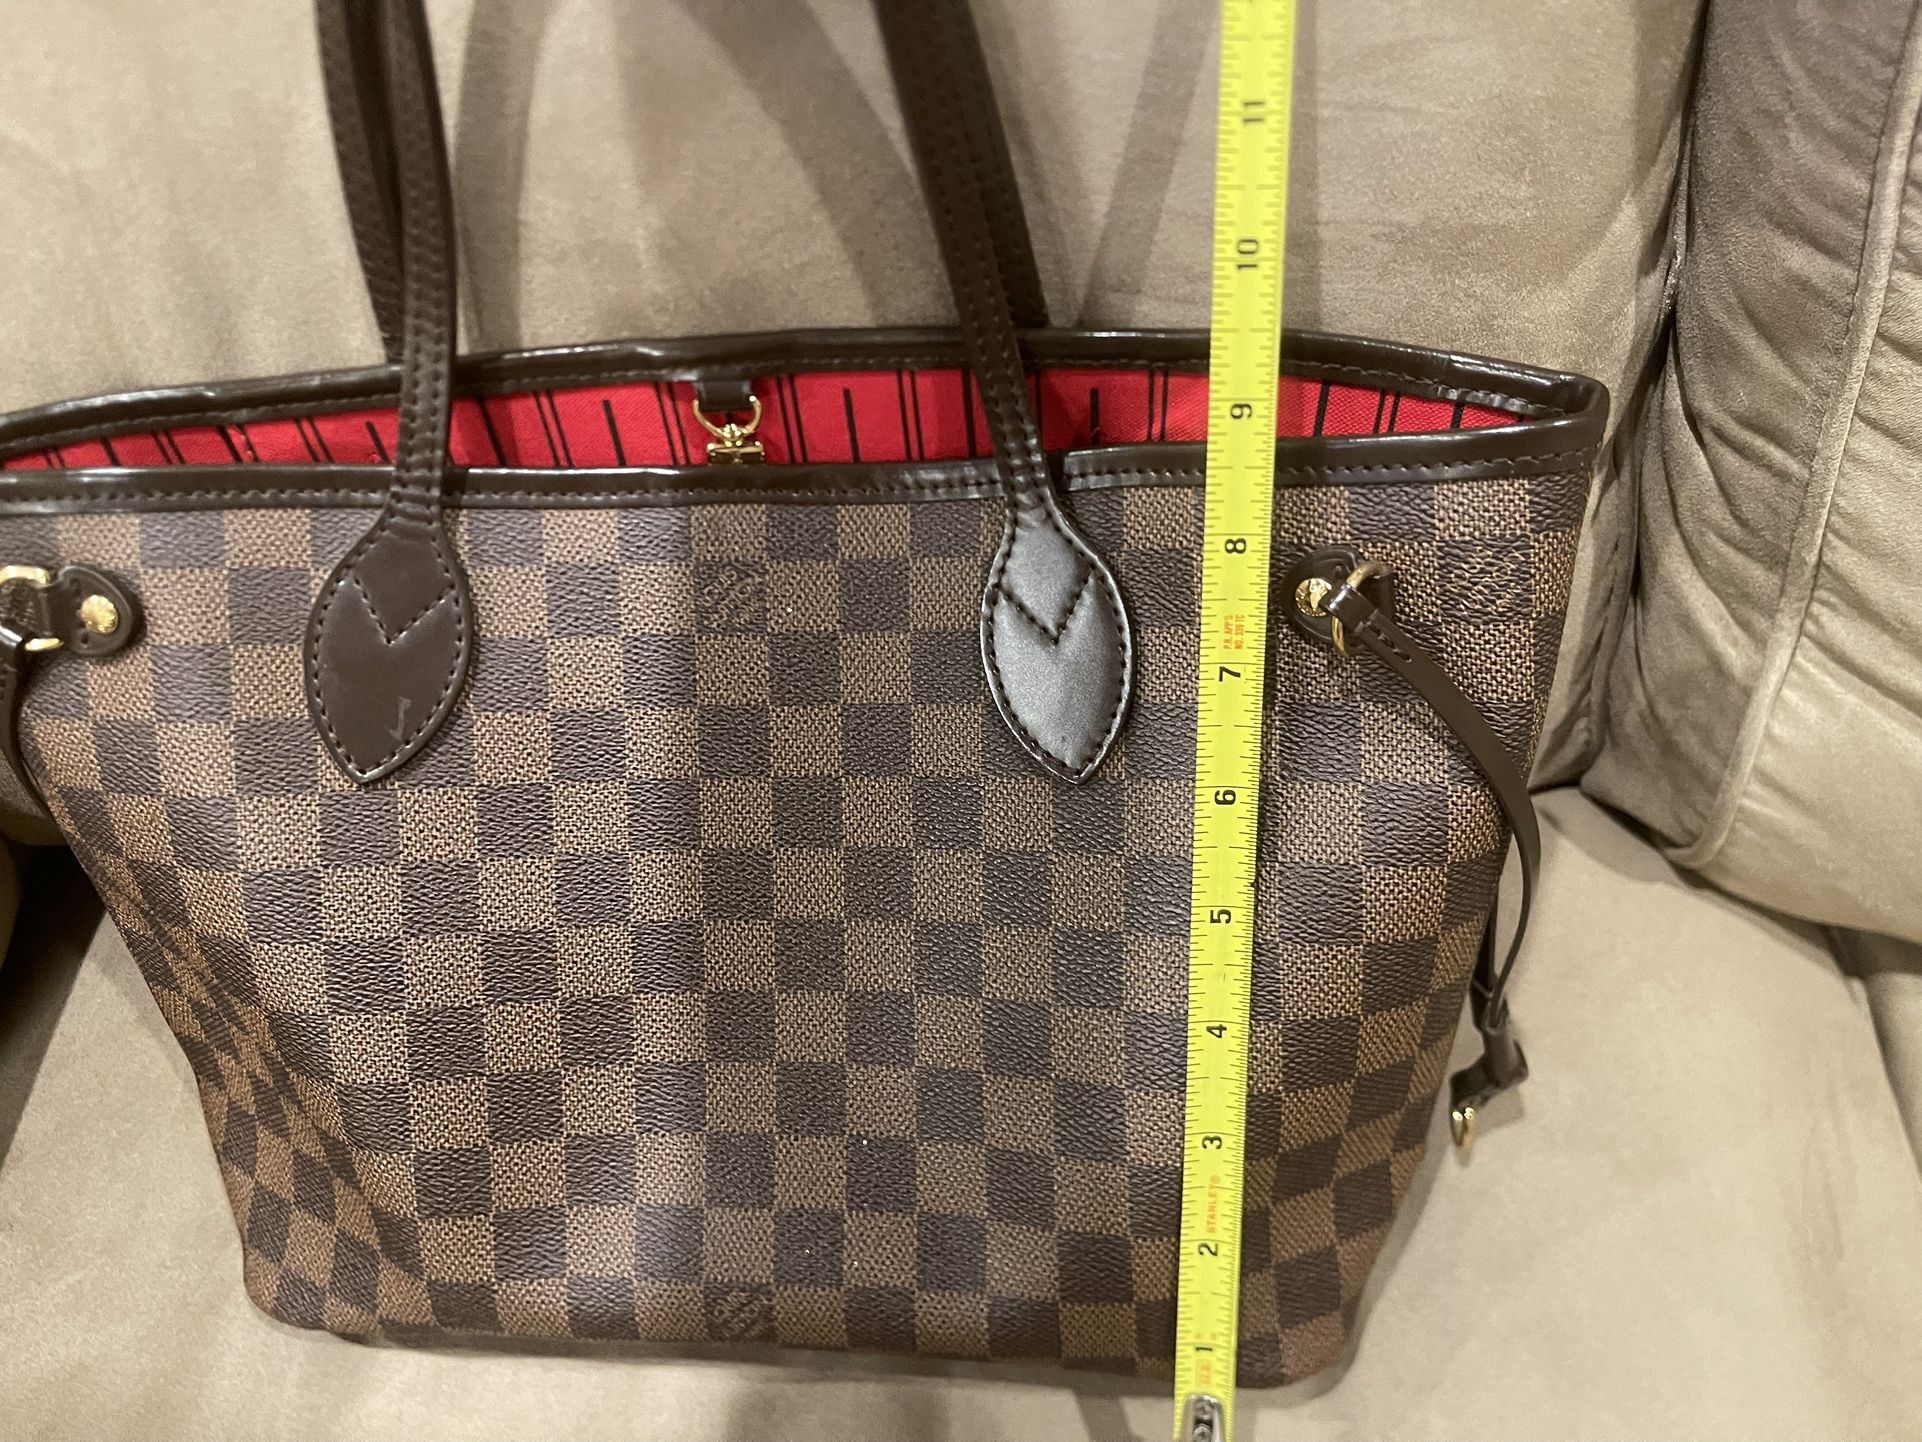 Louis Vuitton Articles De Voyage 101 Champs Elysees Paris Tote Handbag  $1600 Dollars OFF MSRP $2880 for Sale in New York, NY - OfferUp